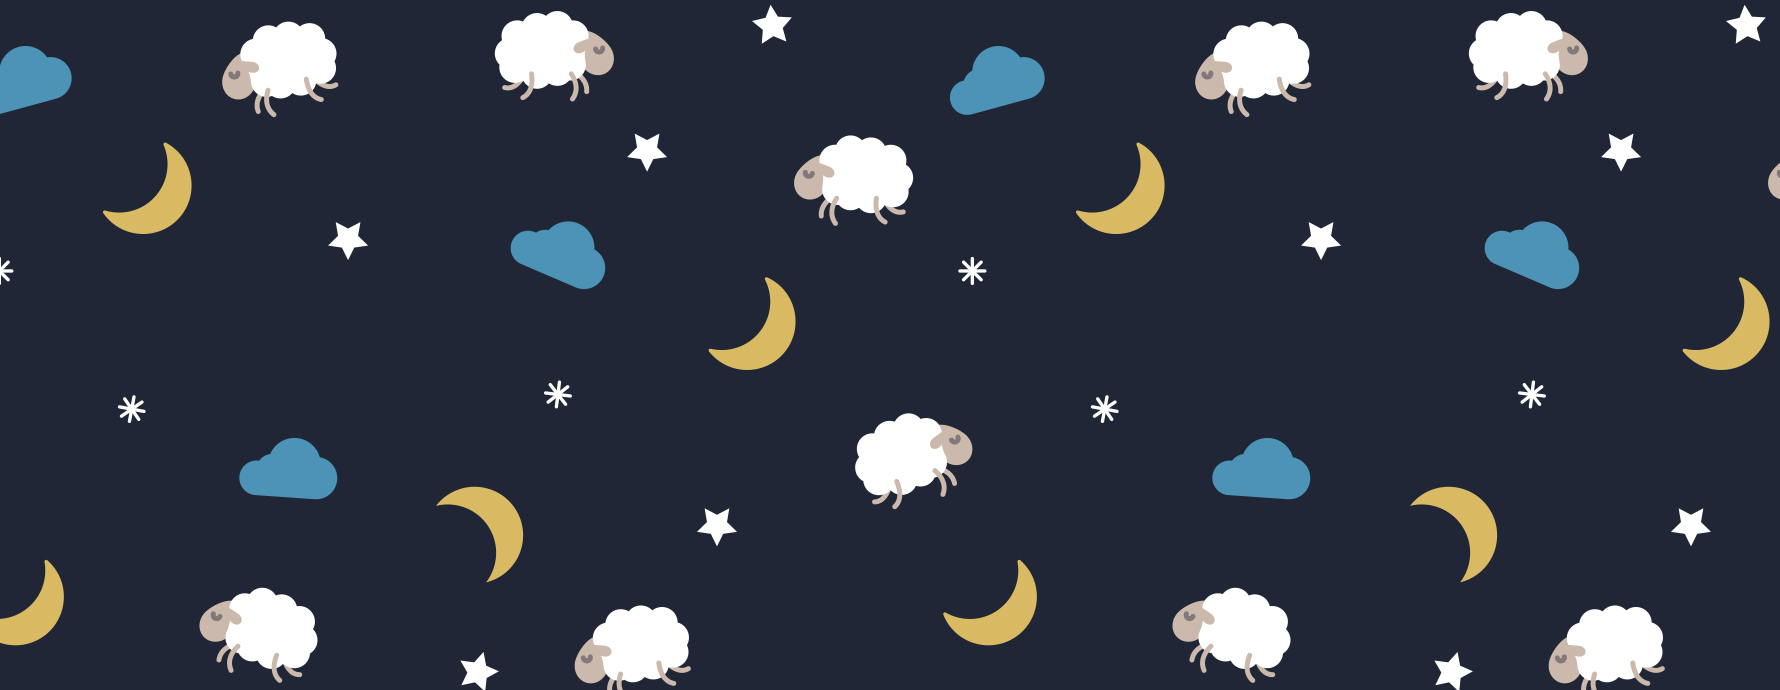 graphics of crescent moons, sheep, stars, and clouds on a dark night sky